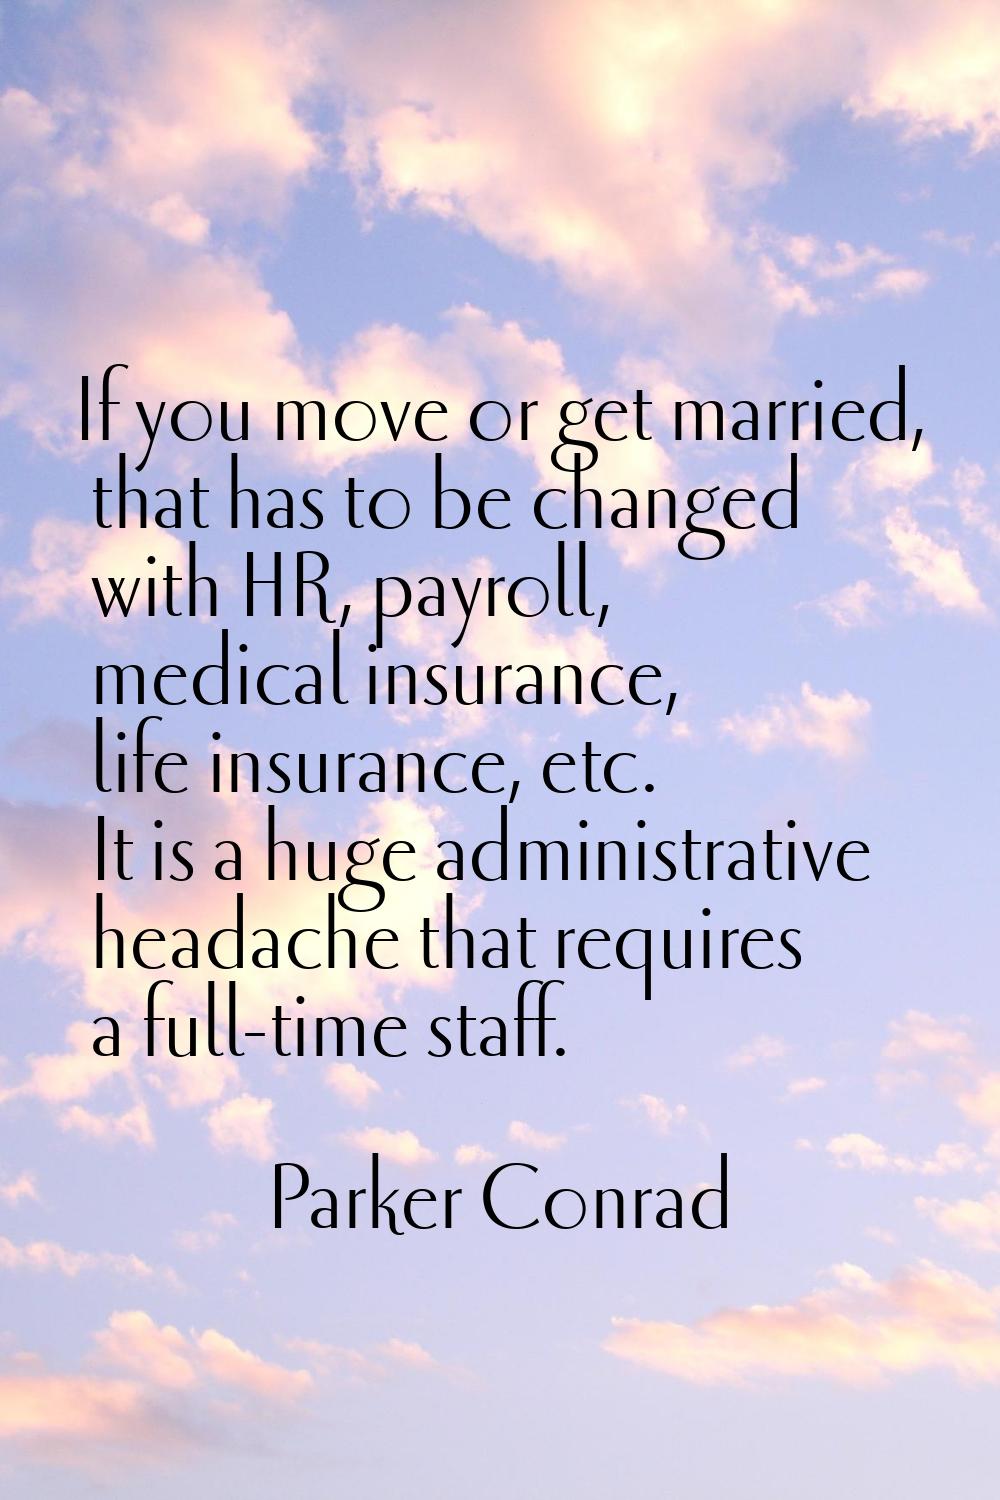 If you move or get married, that has to be changed with HR, payroll, medical insurance, life insura